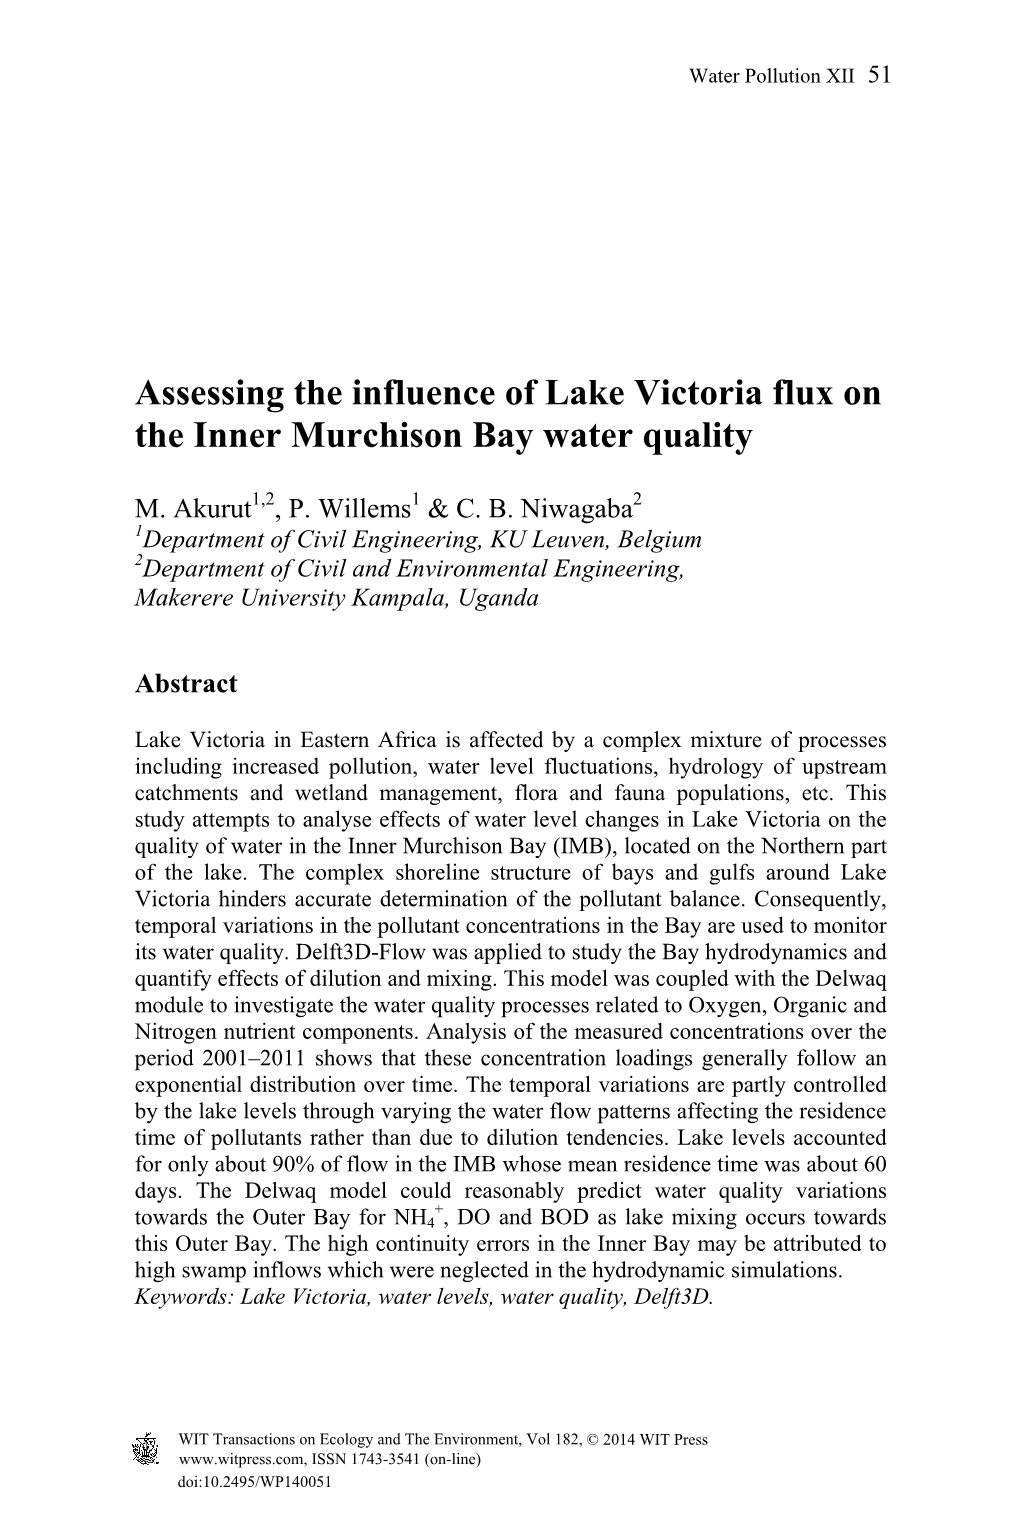 Assessing the Influence of Lake Victoria Flux on the Inner Murchison Bay Water Quality